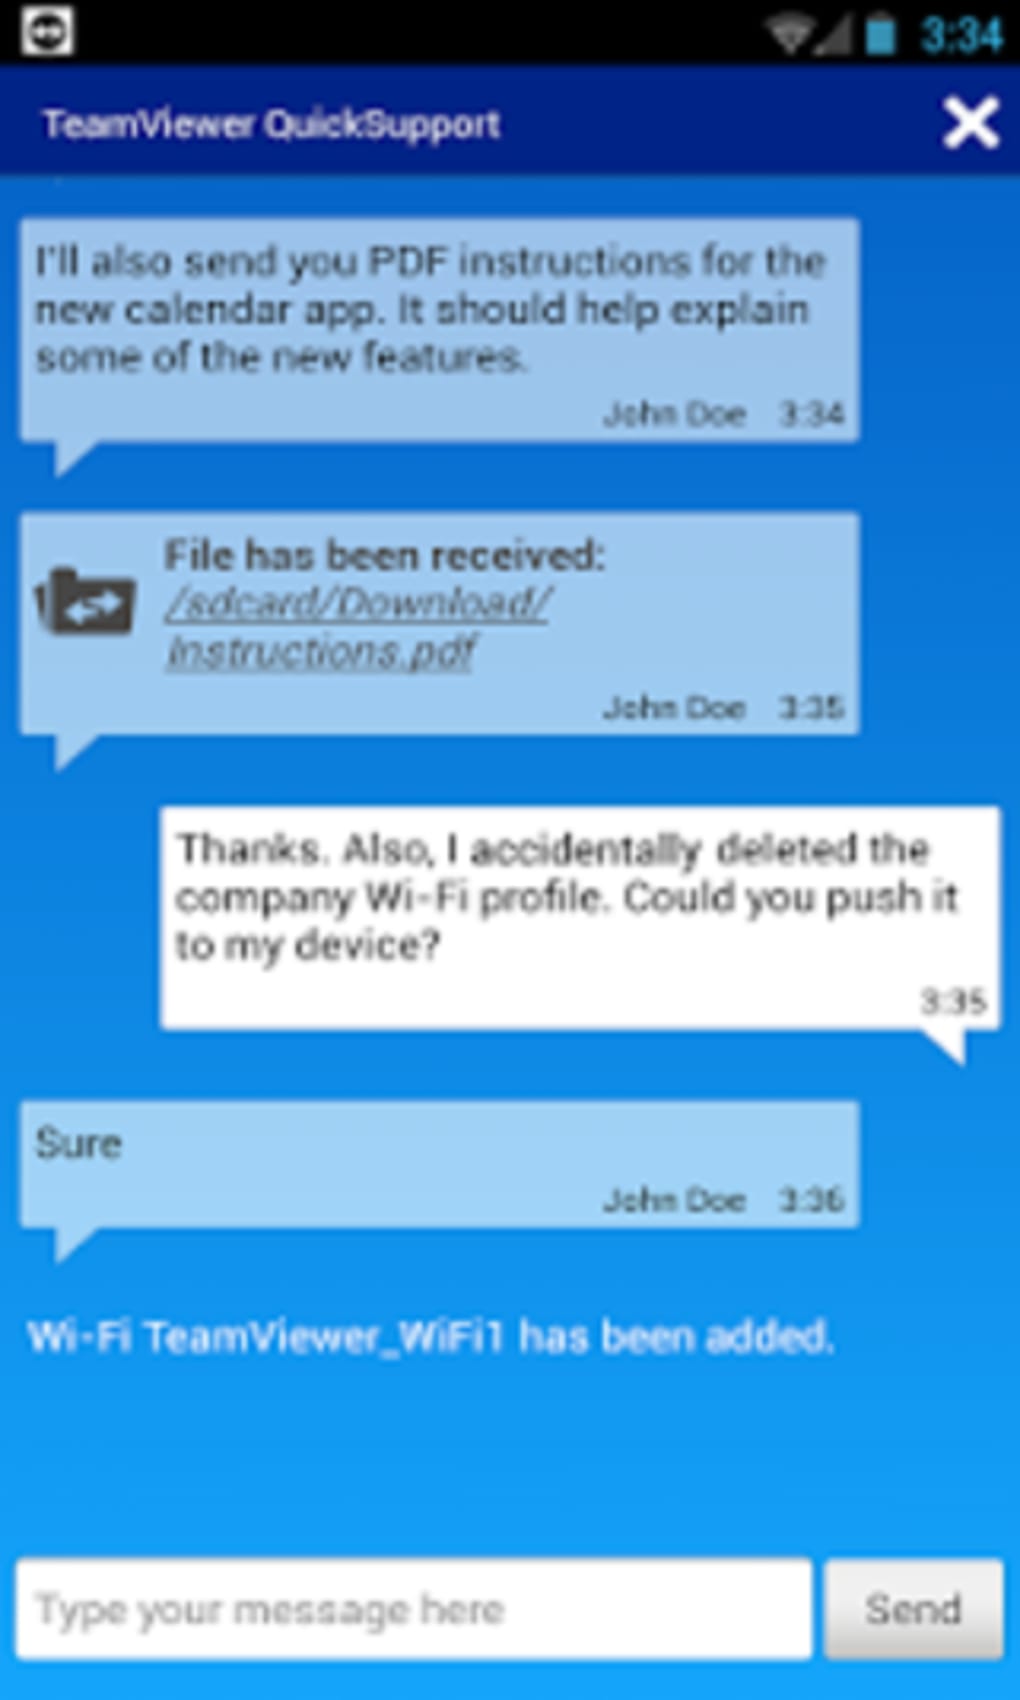 teamviewer quicksupport previous versions